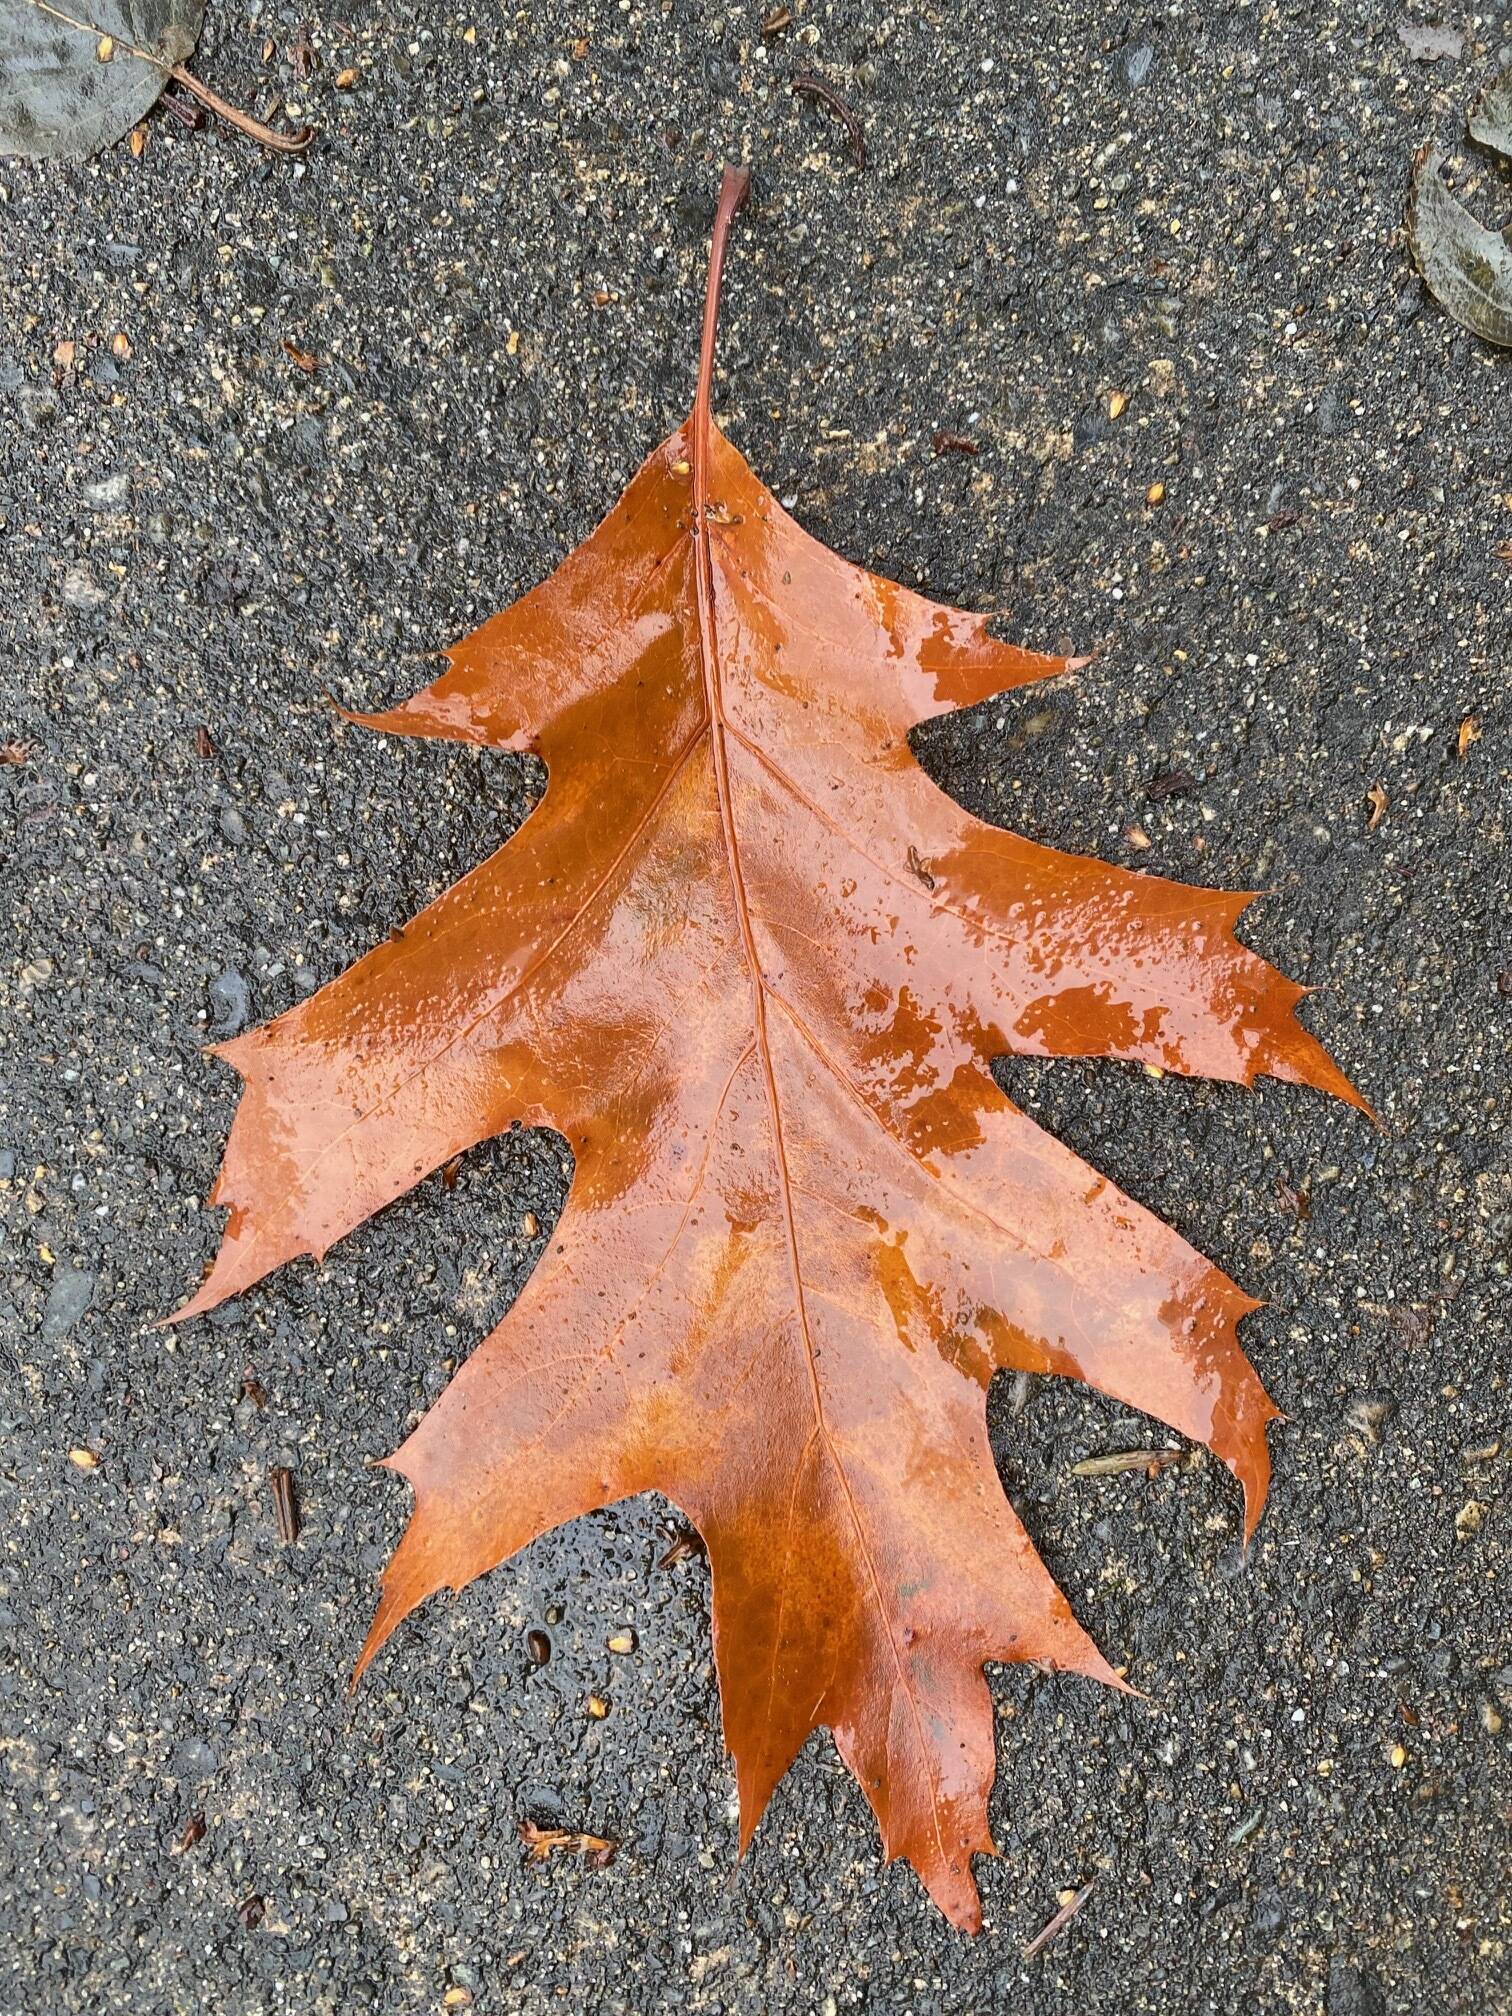 An oak leaf that let go of its branch and drifted to the sidewalk in the flats on Nov. 18. (Photo by Denise Carroll)